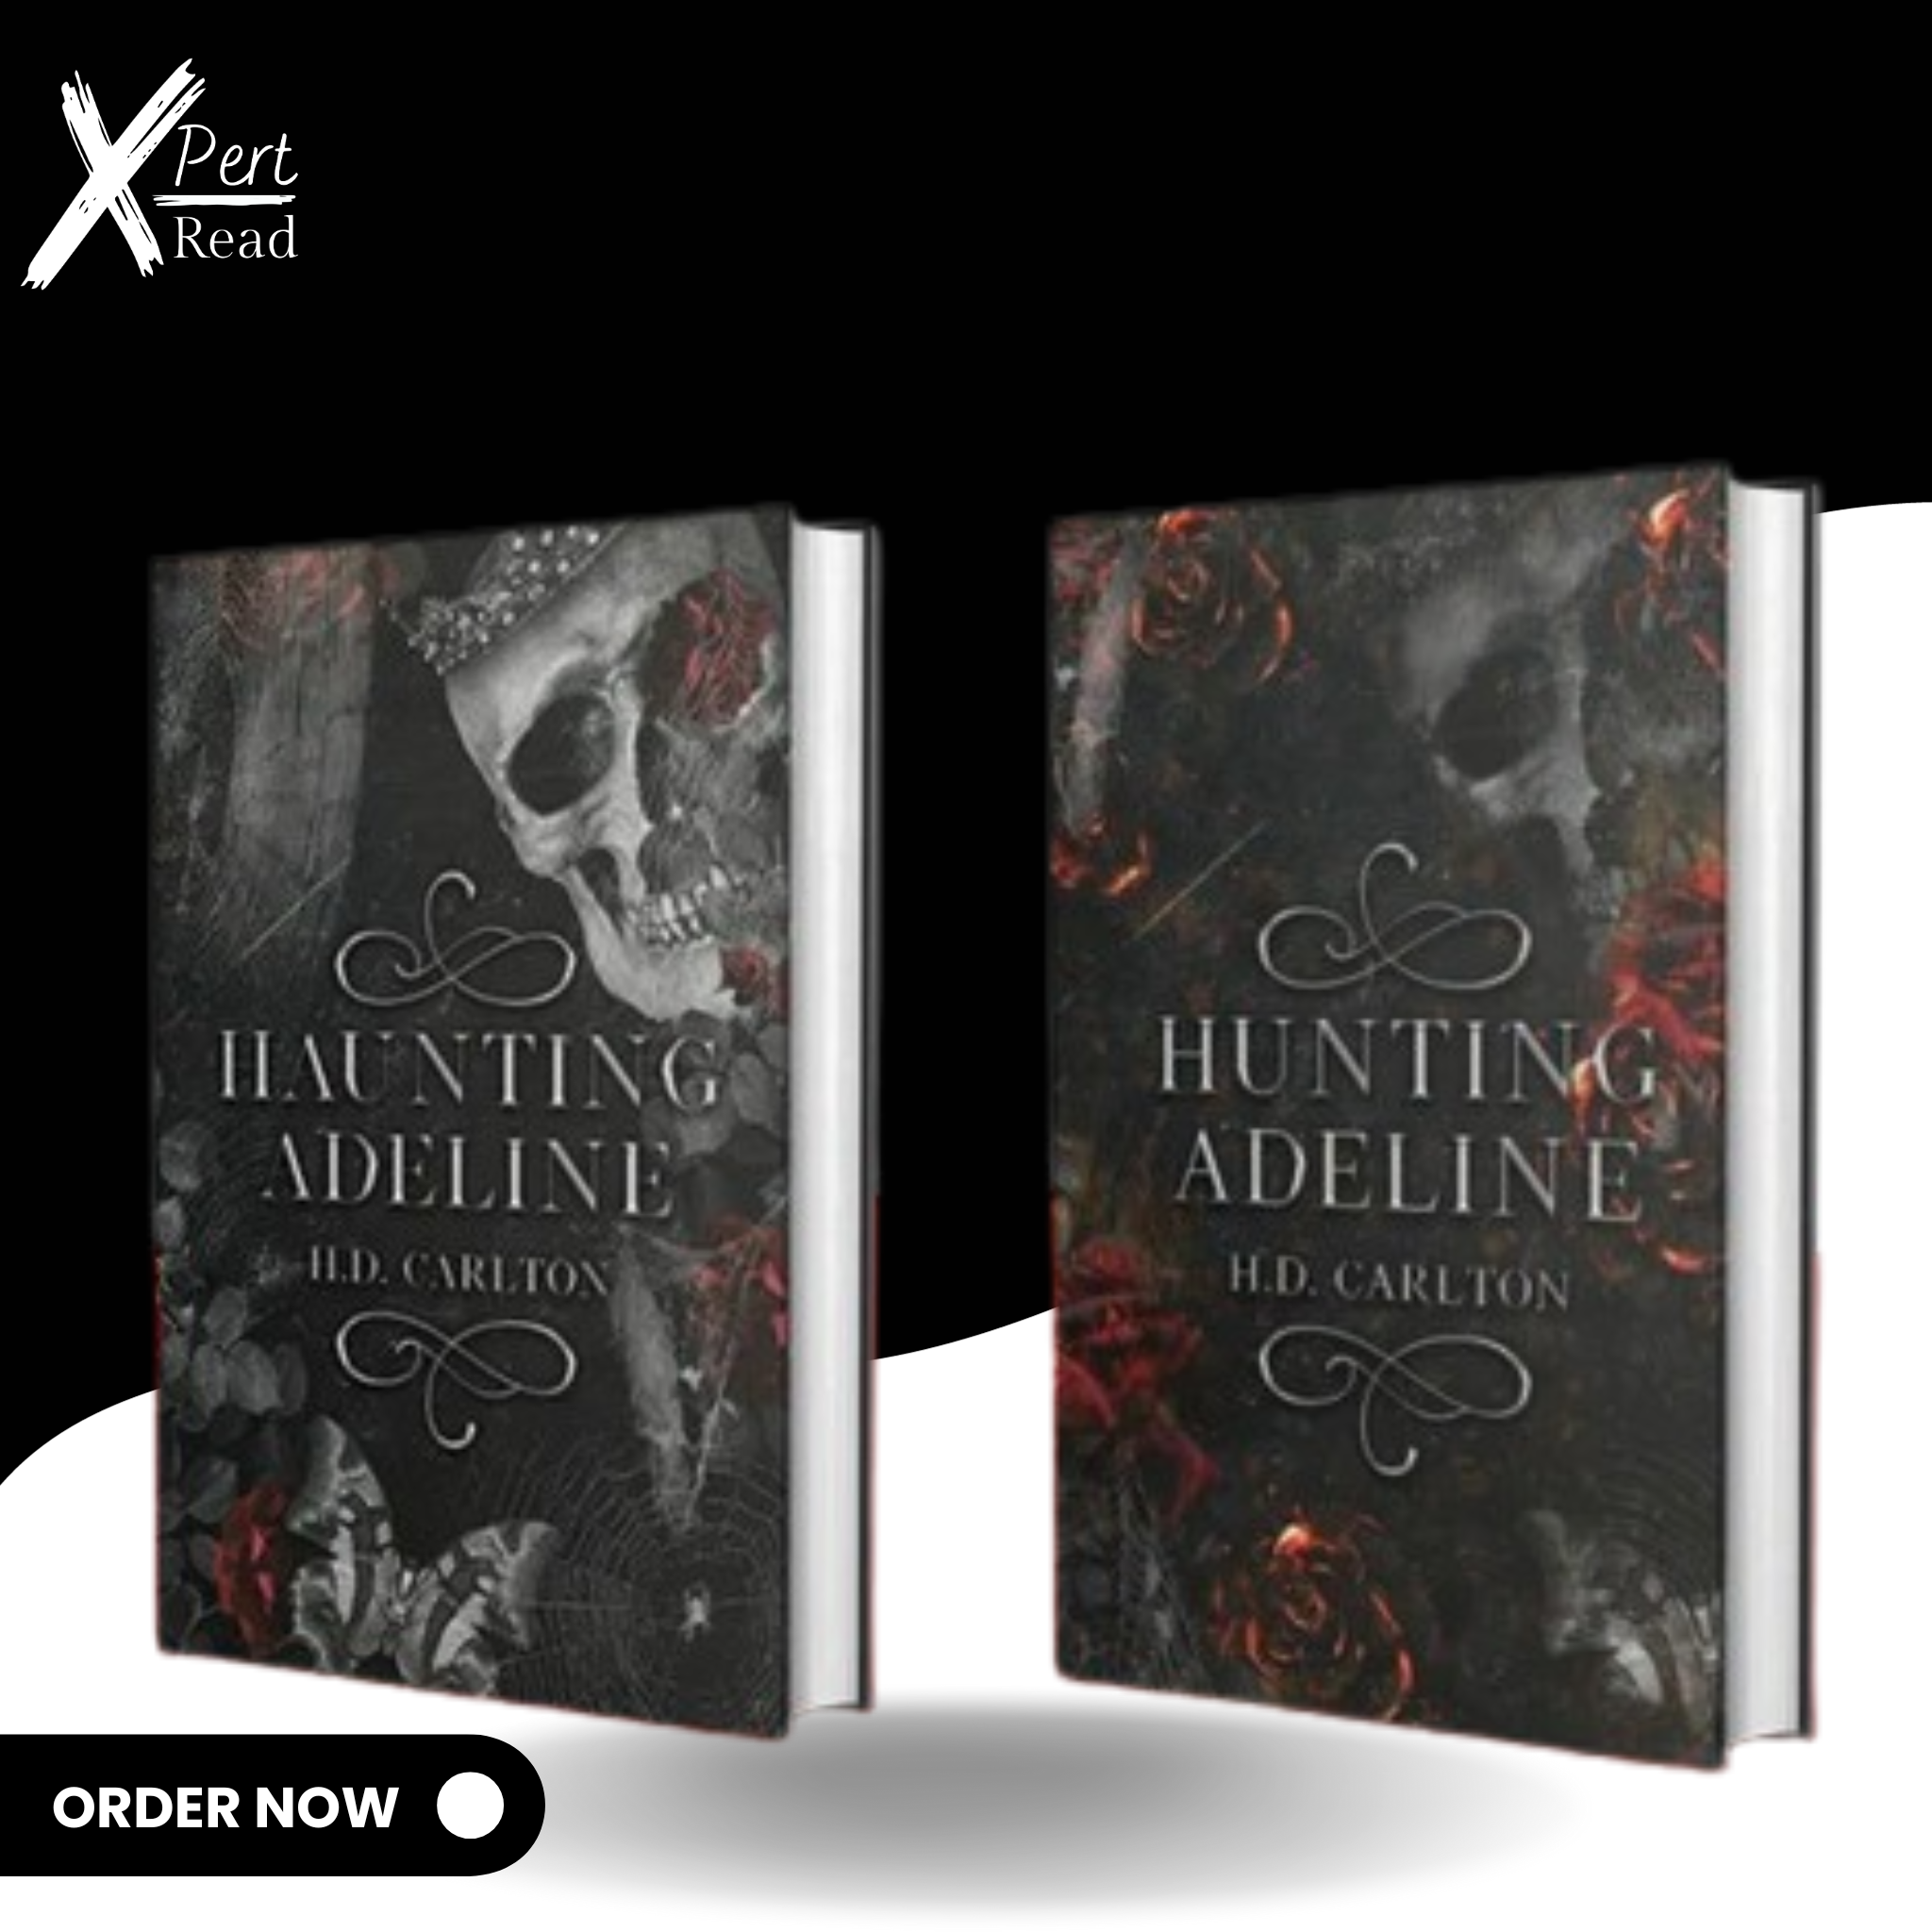 Haunting Adeline and Hunting Adeline By H. D. Carlton (2 Books) (Cat and Mouse Series) (Hardcover)